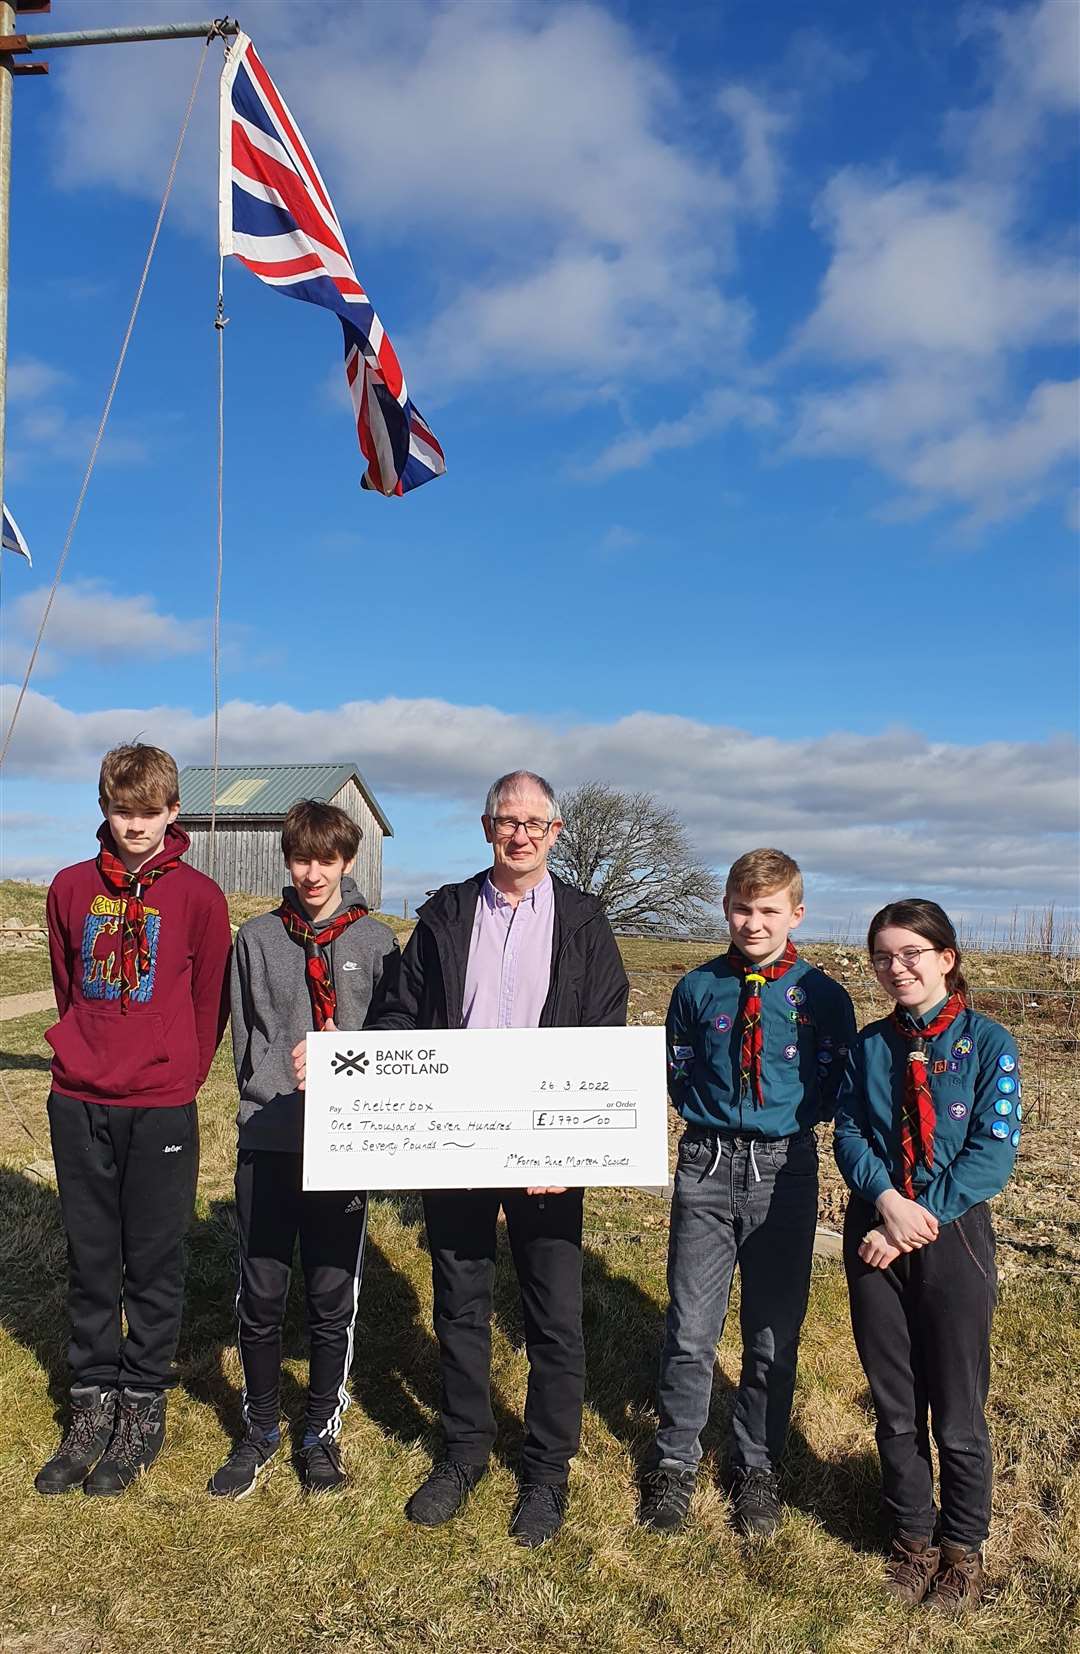 Adam Rhind, Jack Kendrick, Harry Elvines and Phoebe Dennis with Forres Rotary president Tony O’Neill at Aitnoch off the A939.